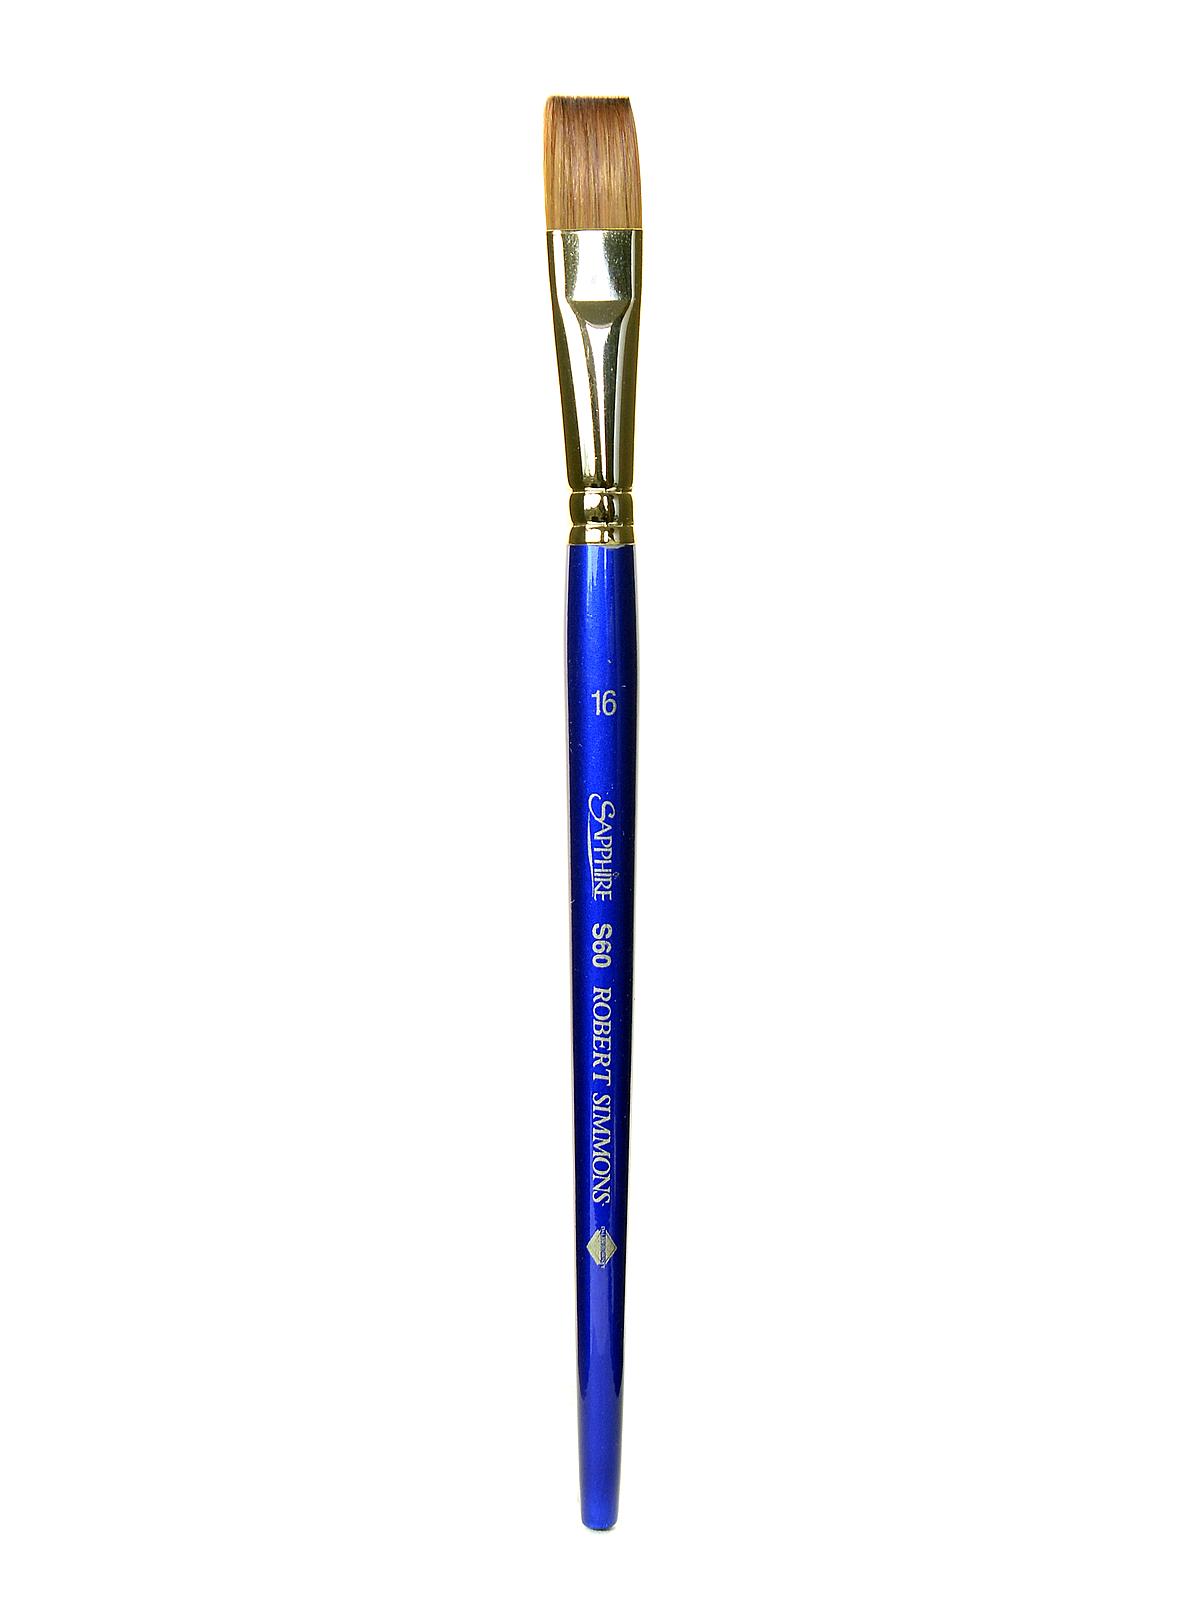 Sapphire Series Synthetic Brushes Short Handle 16 Flat Shader S60